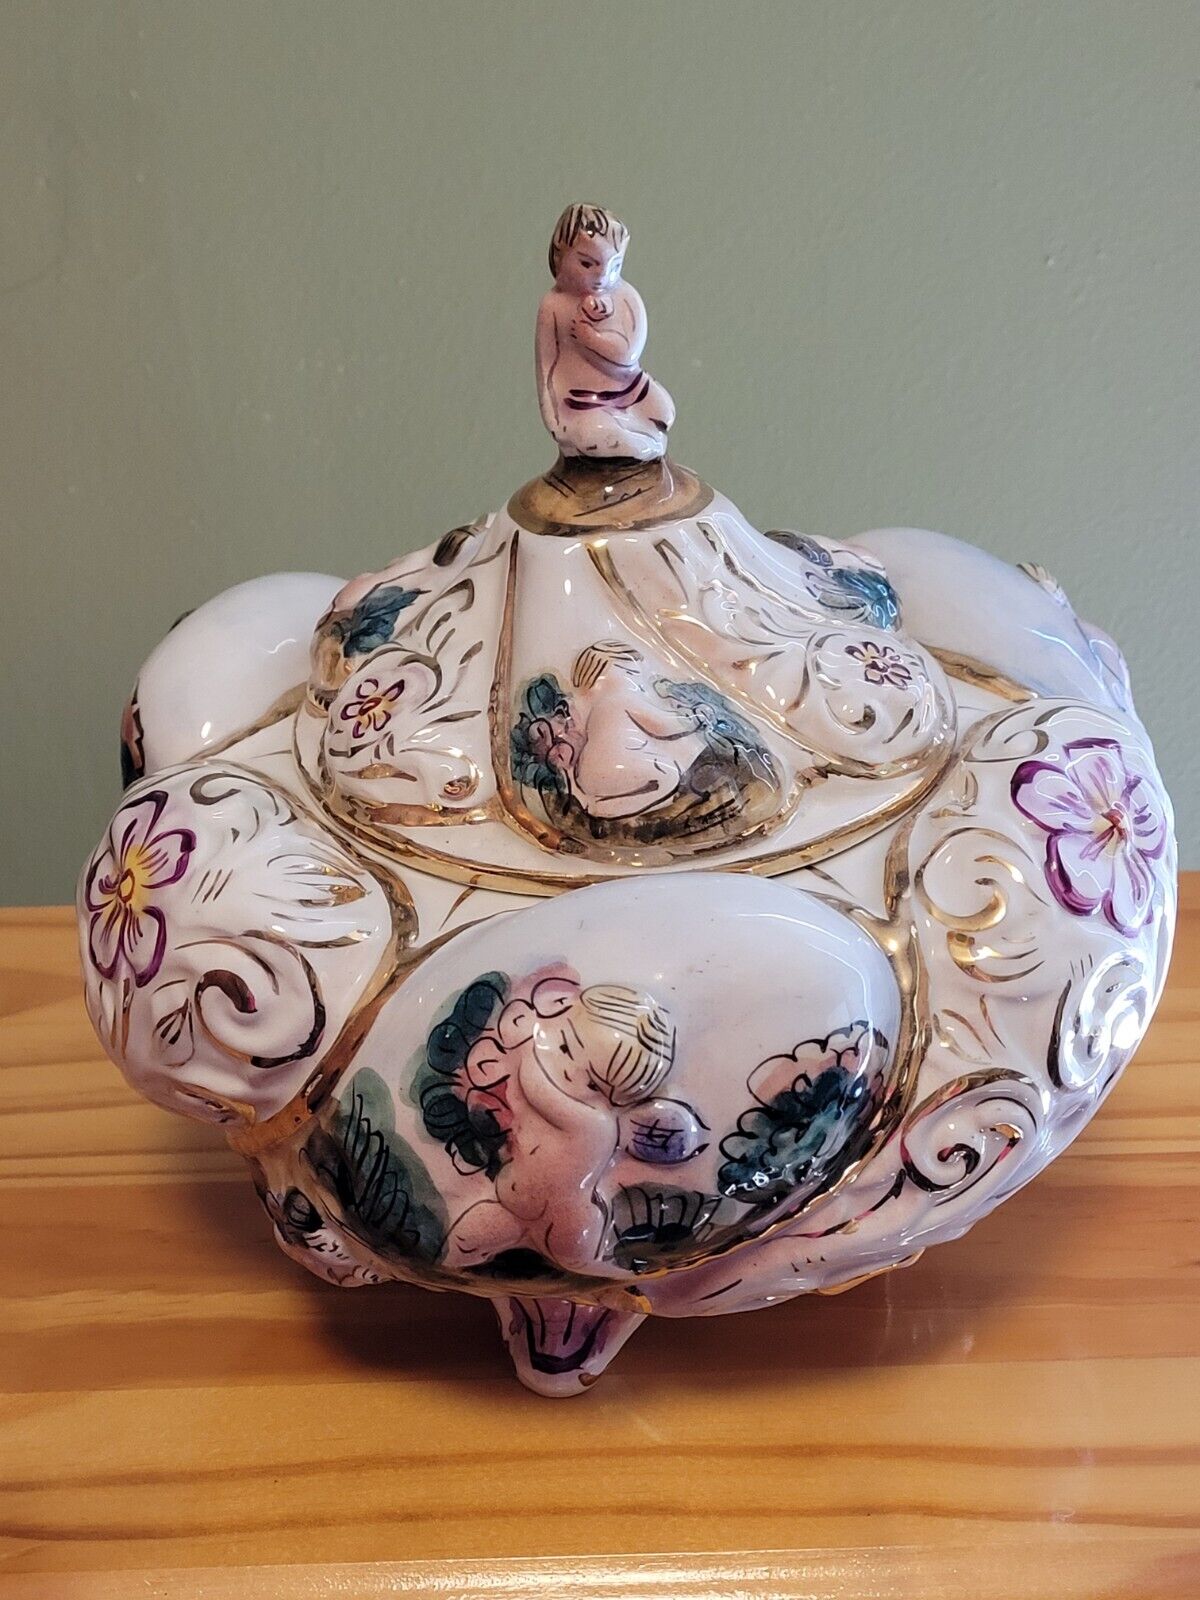 Vintage Capodimonte Italy Footed Covered Bowl Porcelain With Cherubs #446